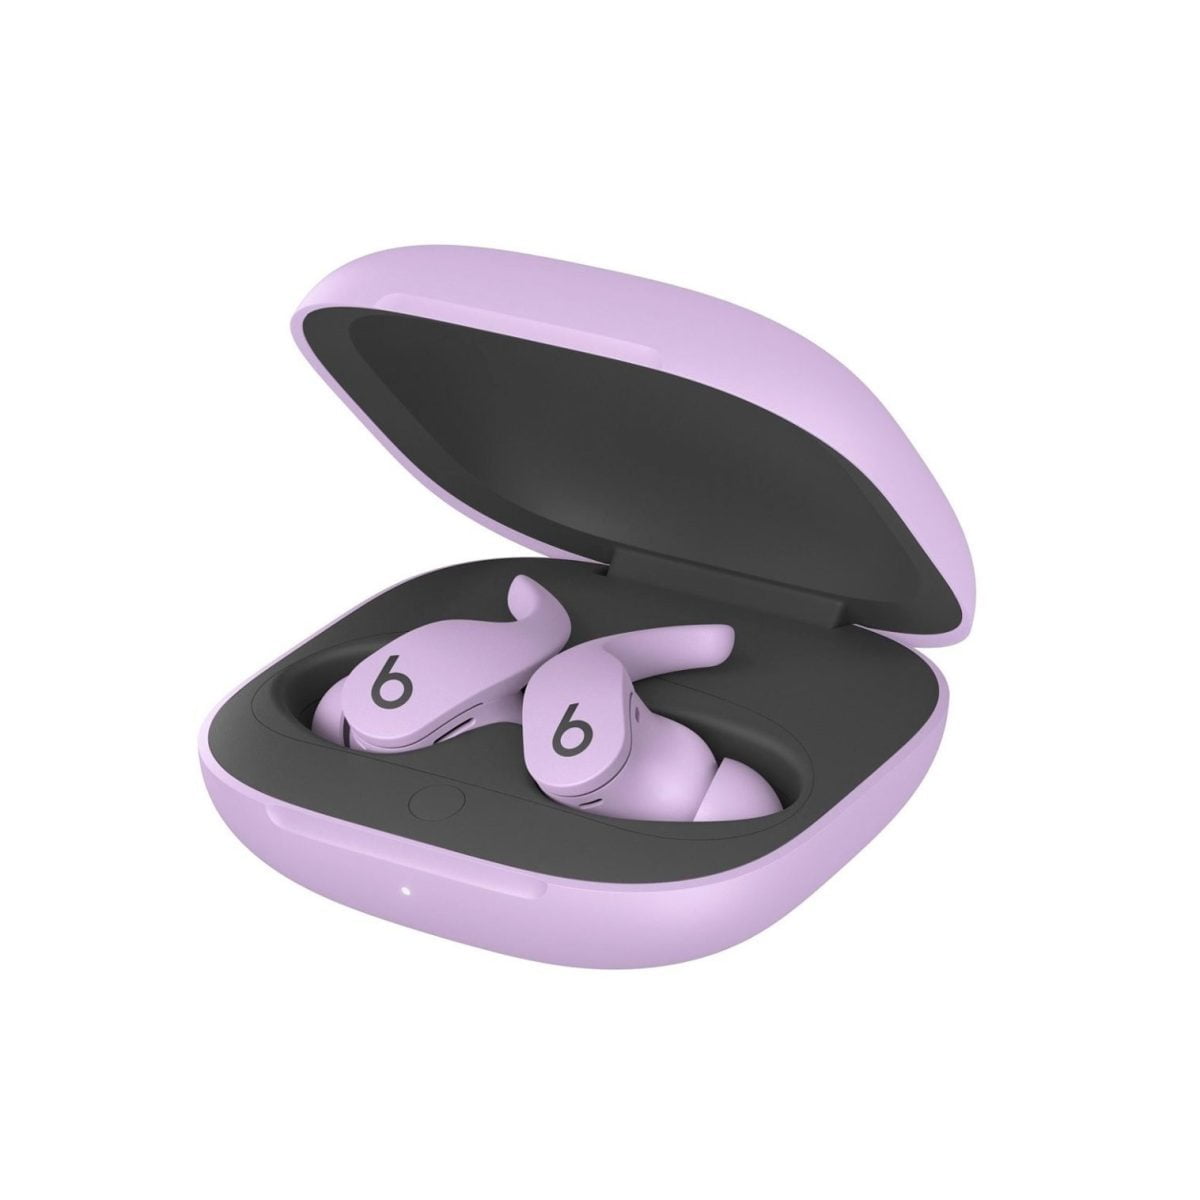 6490270Cv14A Beats &Lt;H1 Class=&Quot;Heading-5 V-Fw-Regular&Quot;&Gt;Beats Fit Pro True Wireless Noise Cancelling In-Ear Headphones - Purple&Lt;/H1&Gt; Https://Www.youtube.com/Watch?V=Kzzb-Qssefg &Lt;Div Class=&Quot;Features-List-Container&Quot;&Gt; &Lt;Div Class=&Quot;Features-List All-Features&Quot;&Gt; &Lt;Div Class=&Quot;List-Row&Quot;&Gt; &Lt;P Class=&Quot;Body-Copy&Quot;&Gt;Beats Fit Pro Is Engineered To Deliver Powerful, Balanced Sound Via A Custom Acoustic Platform That Stays With You Through Your Daily Activities.a Proprietary, Dual-Element Diaphragm Driver Resides Within A Twochamber Housing Inside The Bluetooth® Earbuds, Resulting In Clear Sound With Outstanding Stereo Separation. An Advanced Digital Processor Then Optimizes Audio Performance For Loudness And Clarity, While Simultaneously Ensuring Clean Noise-Cancellation.beats Fit Pro Supports Spatial Audio With Dynamic Head Tracking For Immersive Music, Movies, And Games. Dynamic Head Tracking Uses Gyroscopes And Accelerometers To Adjust The Sound As You Turn Your Head, For A Multi-Dimensional Experience That Makes You Feel Like You’re Inside Of It.&Lt;/P&Gt; &Lt;/Div&Gt; &Lt;/Div&Gt; &Lt;/Div&Gt; Beats Fit Pro Beats Fit Pro True Wireless Noise Cancelling In-Ear Headphones - Purple Mk2H3